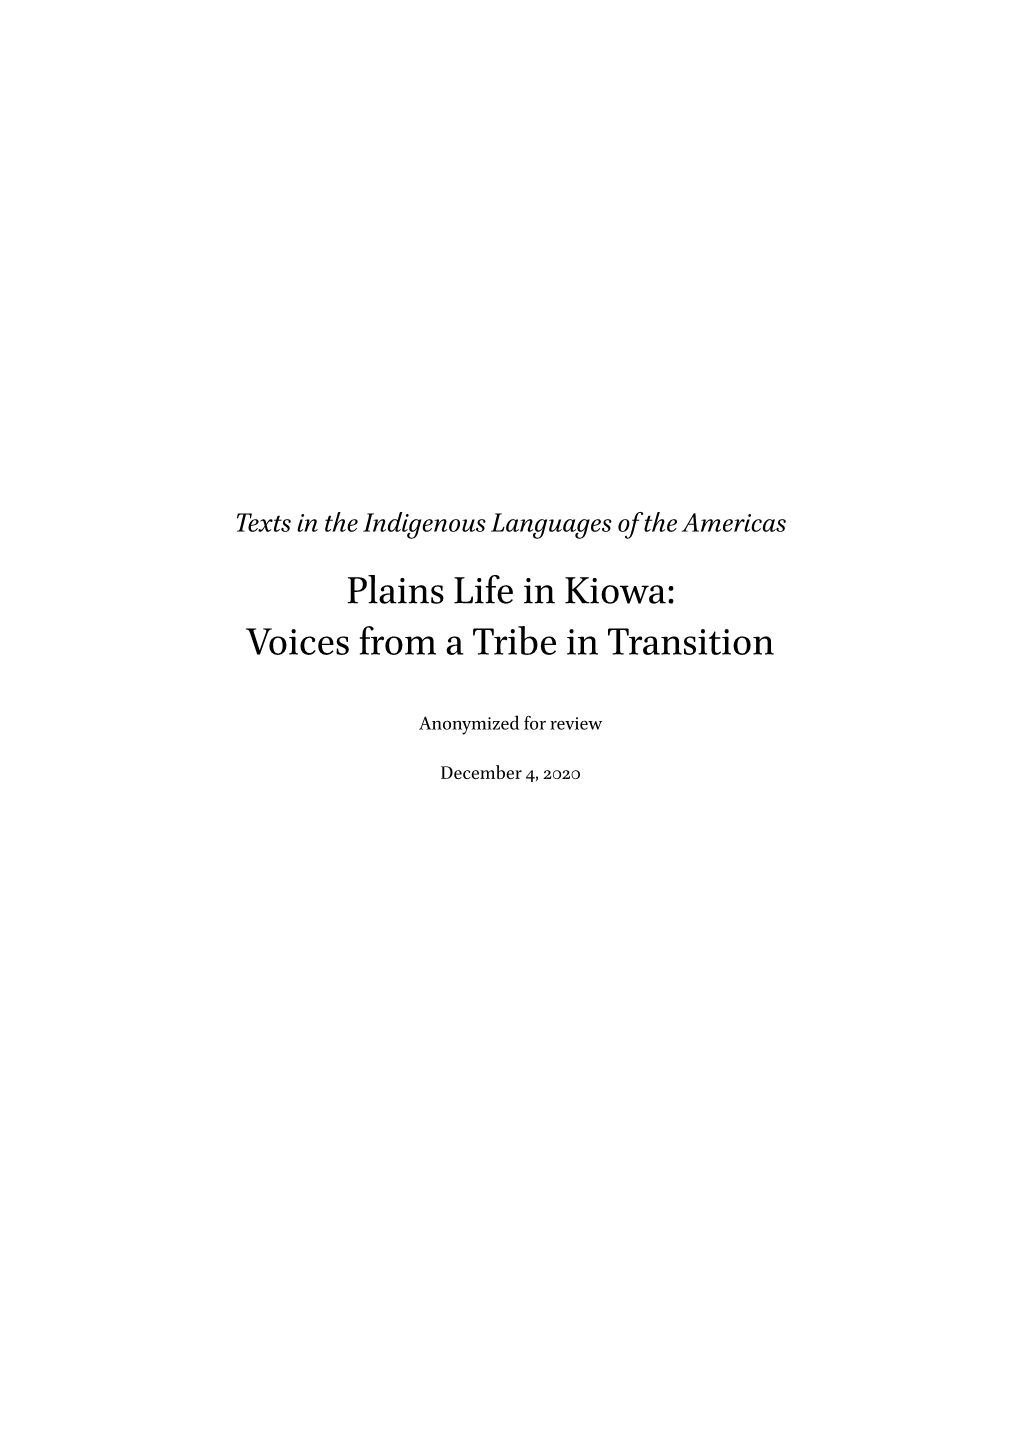 Plains Life in Kiowa: Voices from a Tribe in Transition